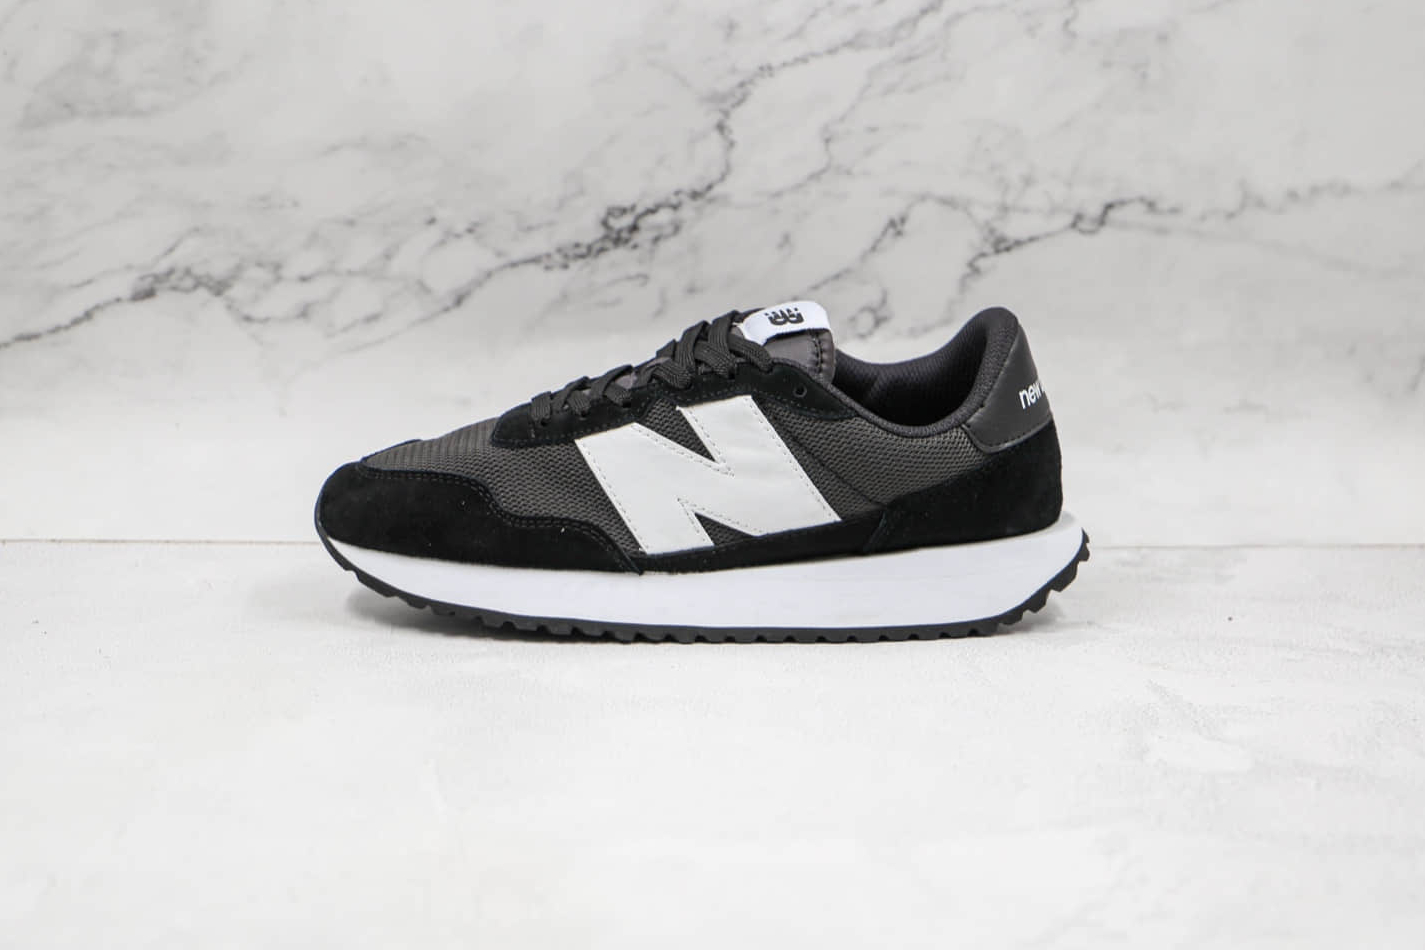 New Balance 237 Shoes Black Grey - Trendy Sneakers for a Fashionable Look